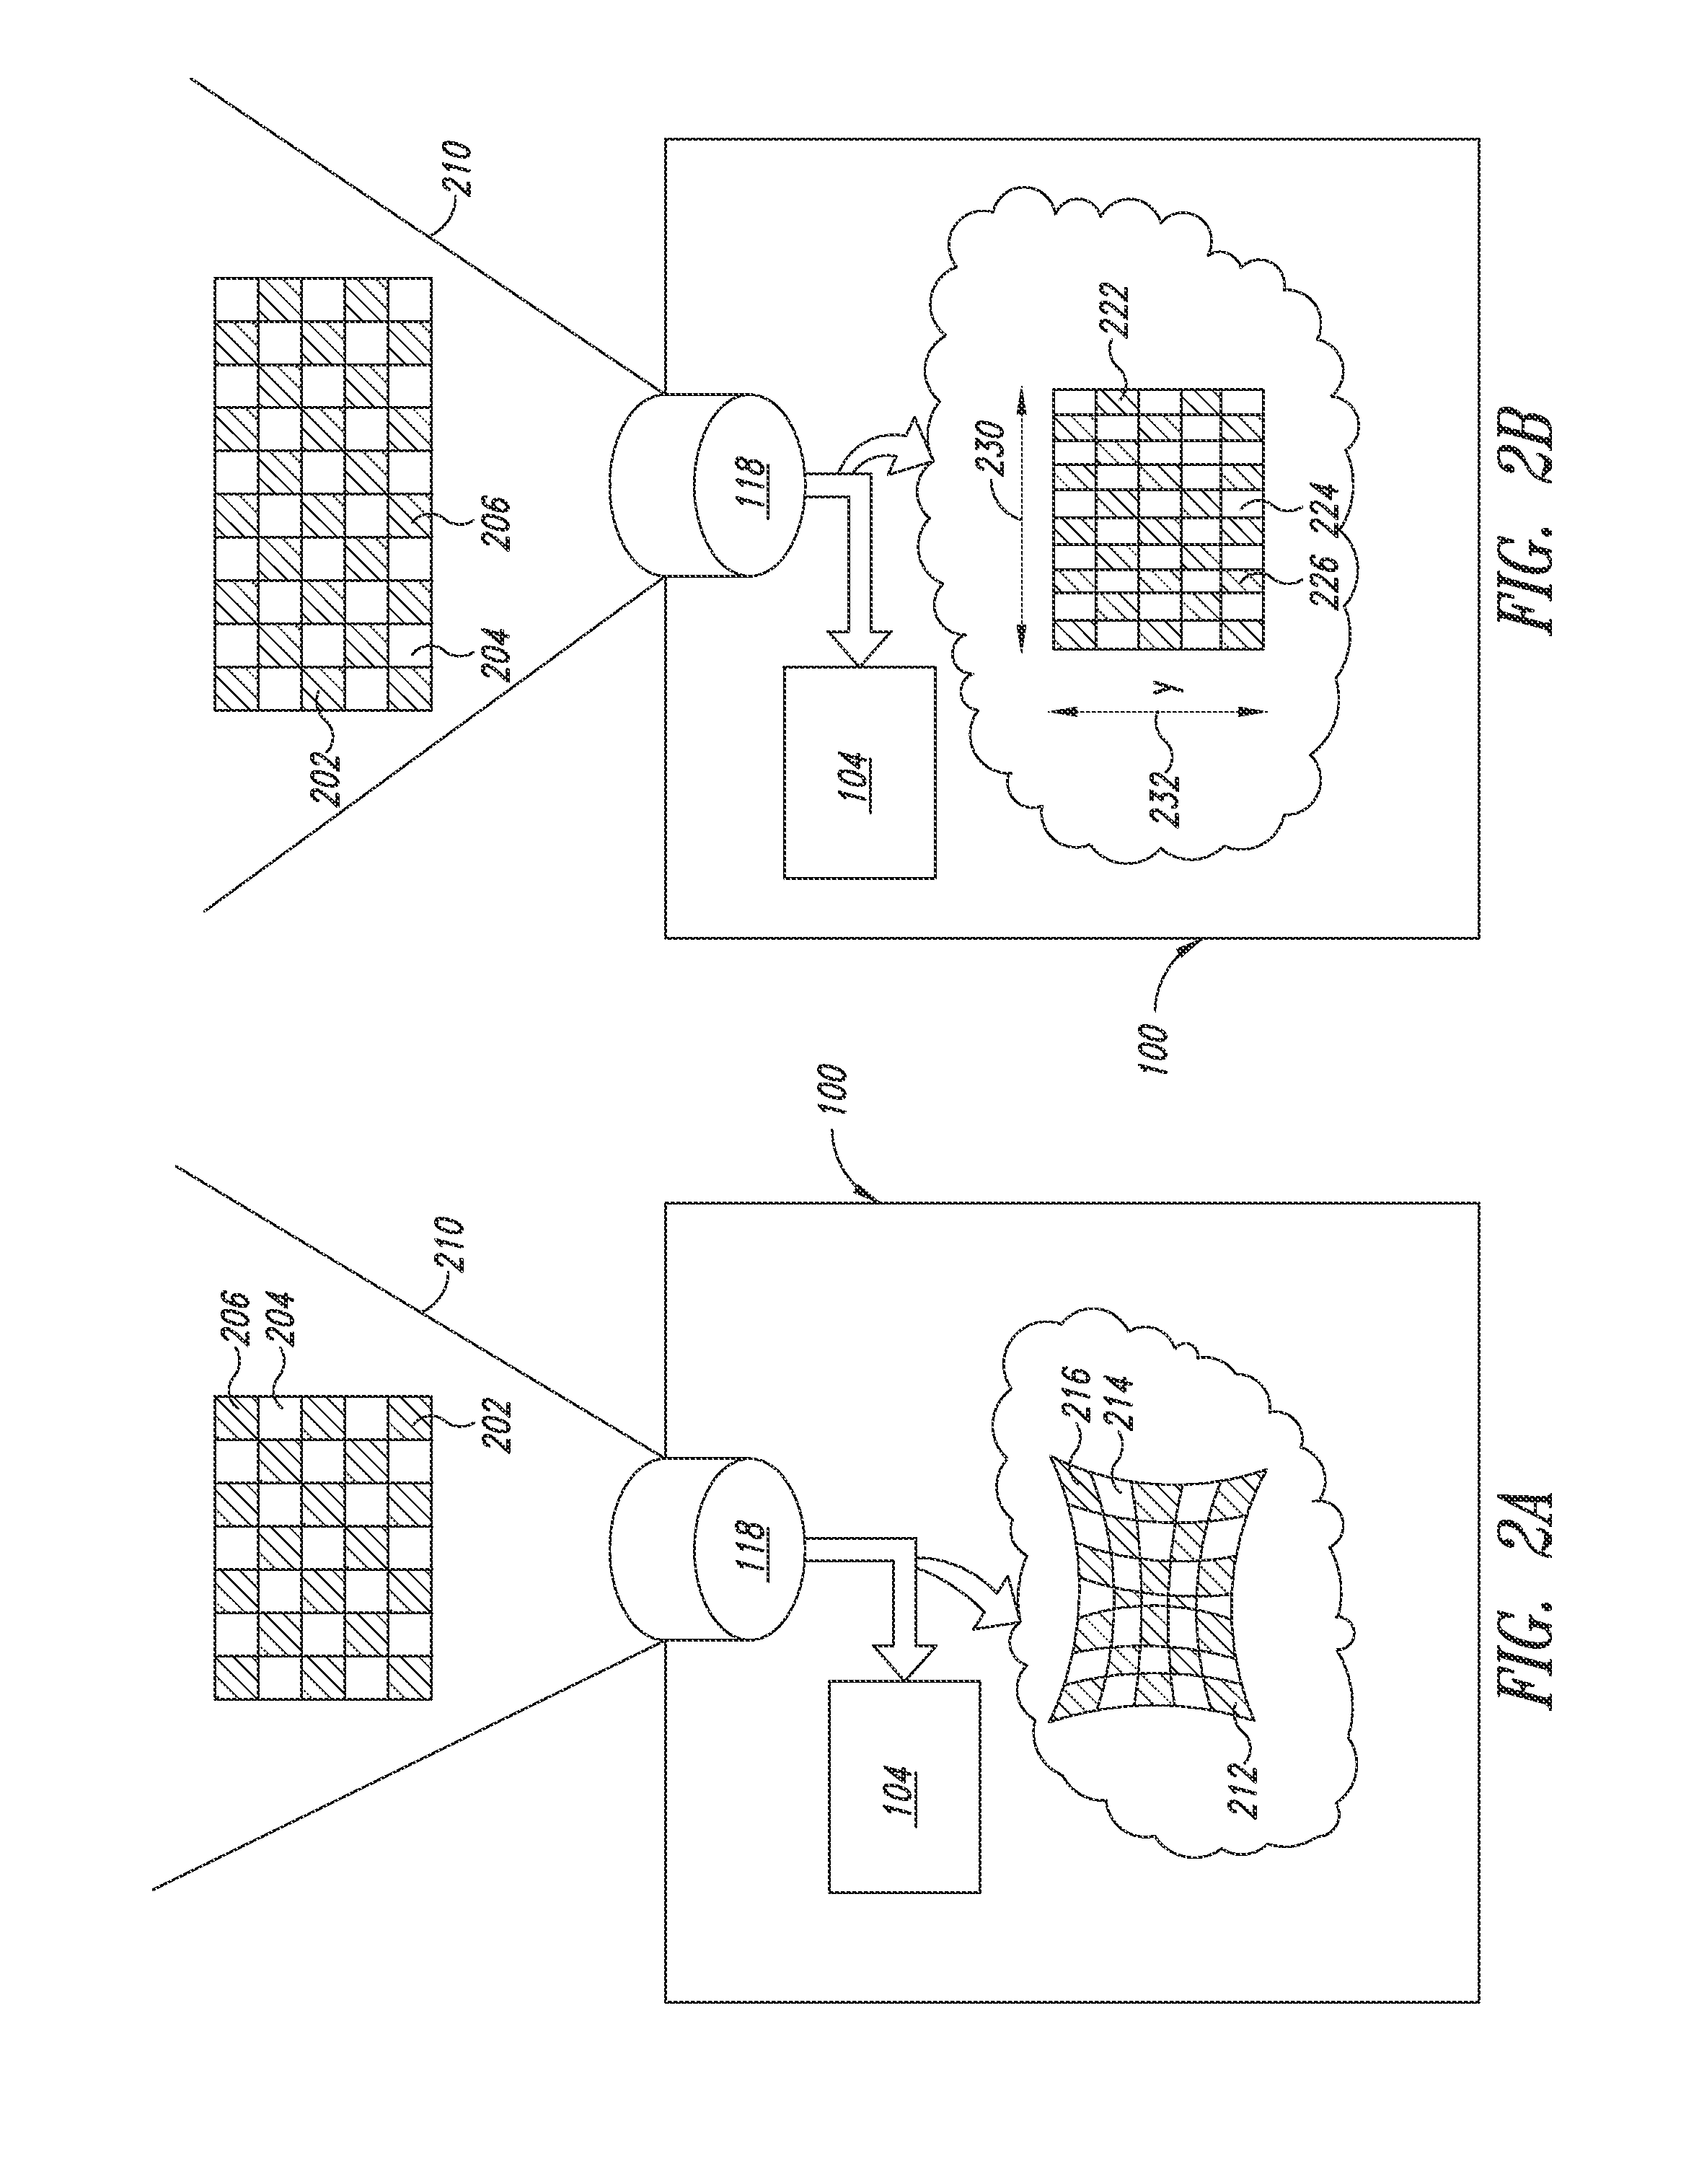 Volume dimensioning system calibration systems and methods